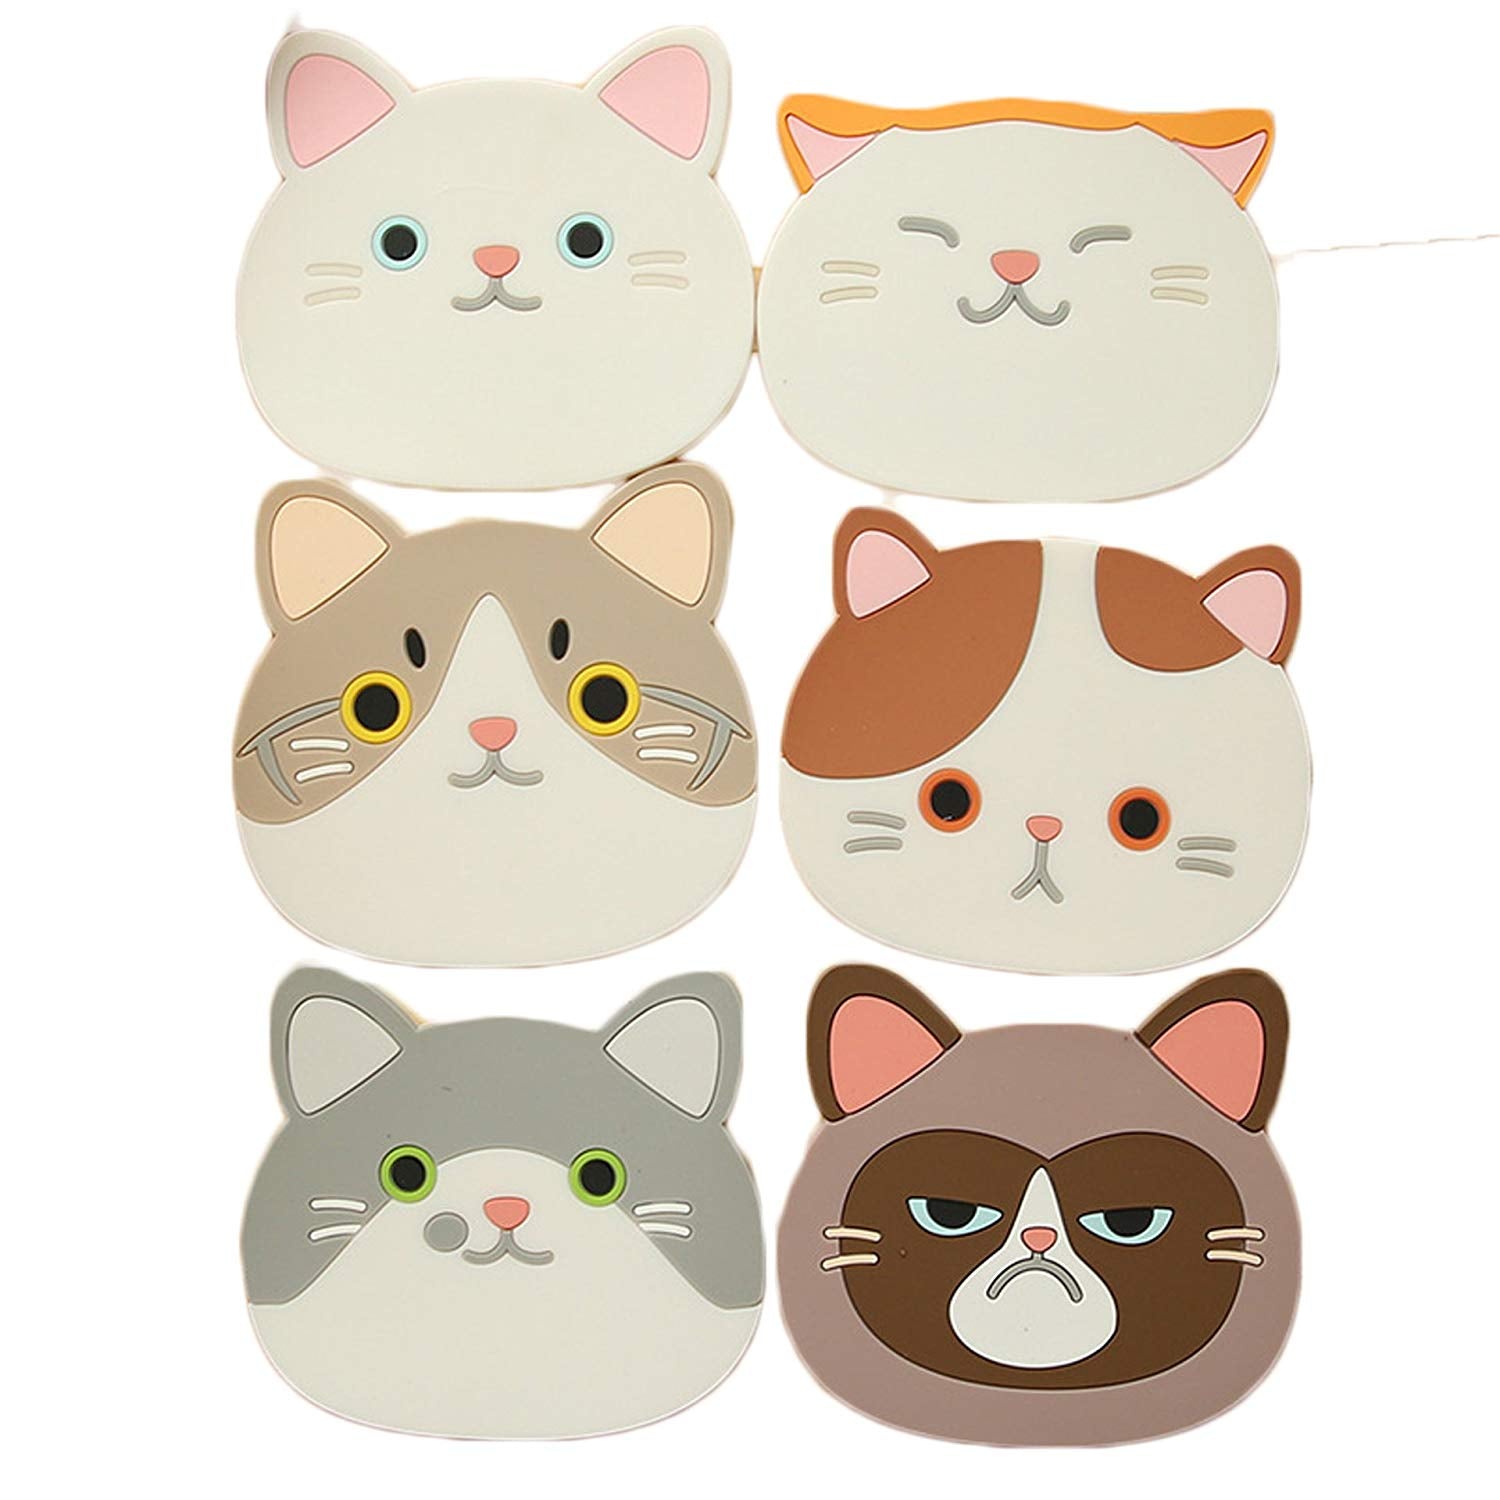 JLHua Finger Ring Silicone Multi-Use Cartoon Cat Trivet (Set of 6 Pack) Insulated Flexible Durable Non Slip Hot Pads and Coasters Cup Mats